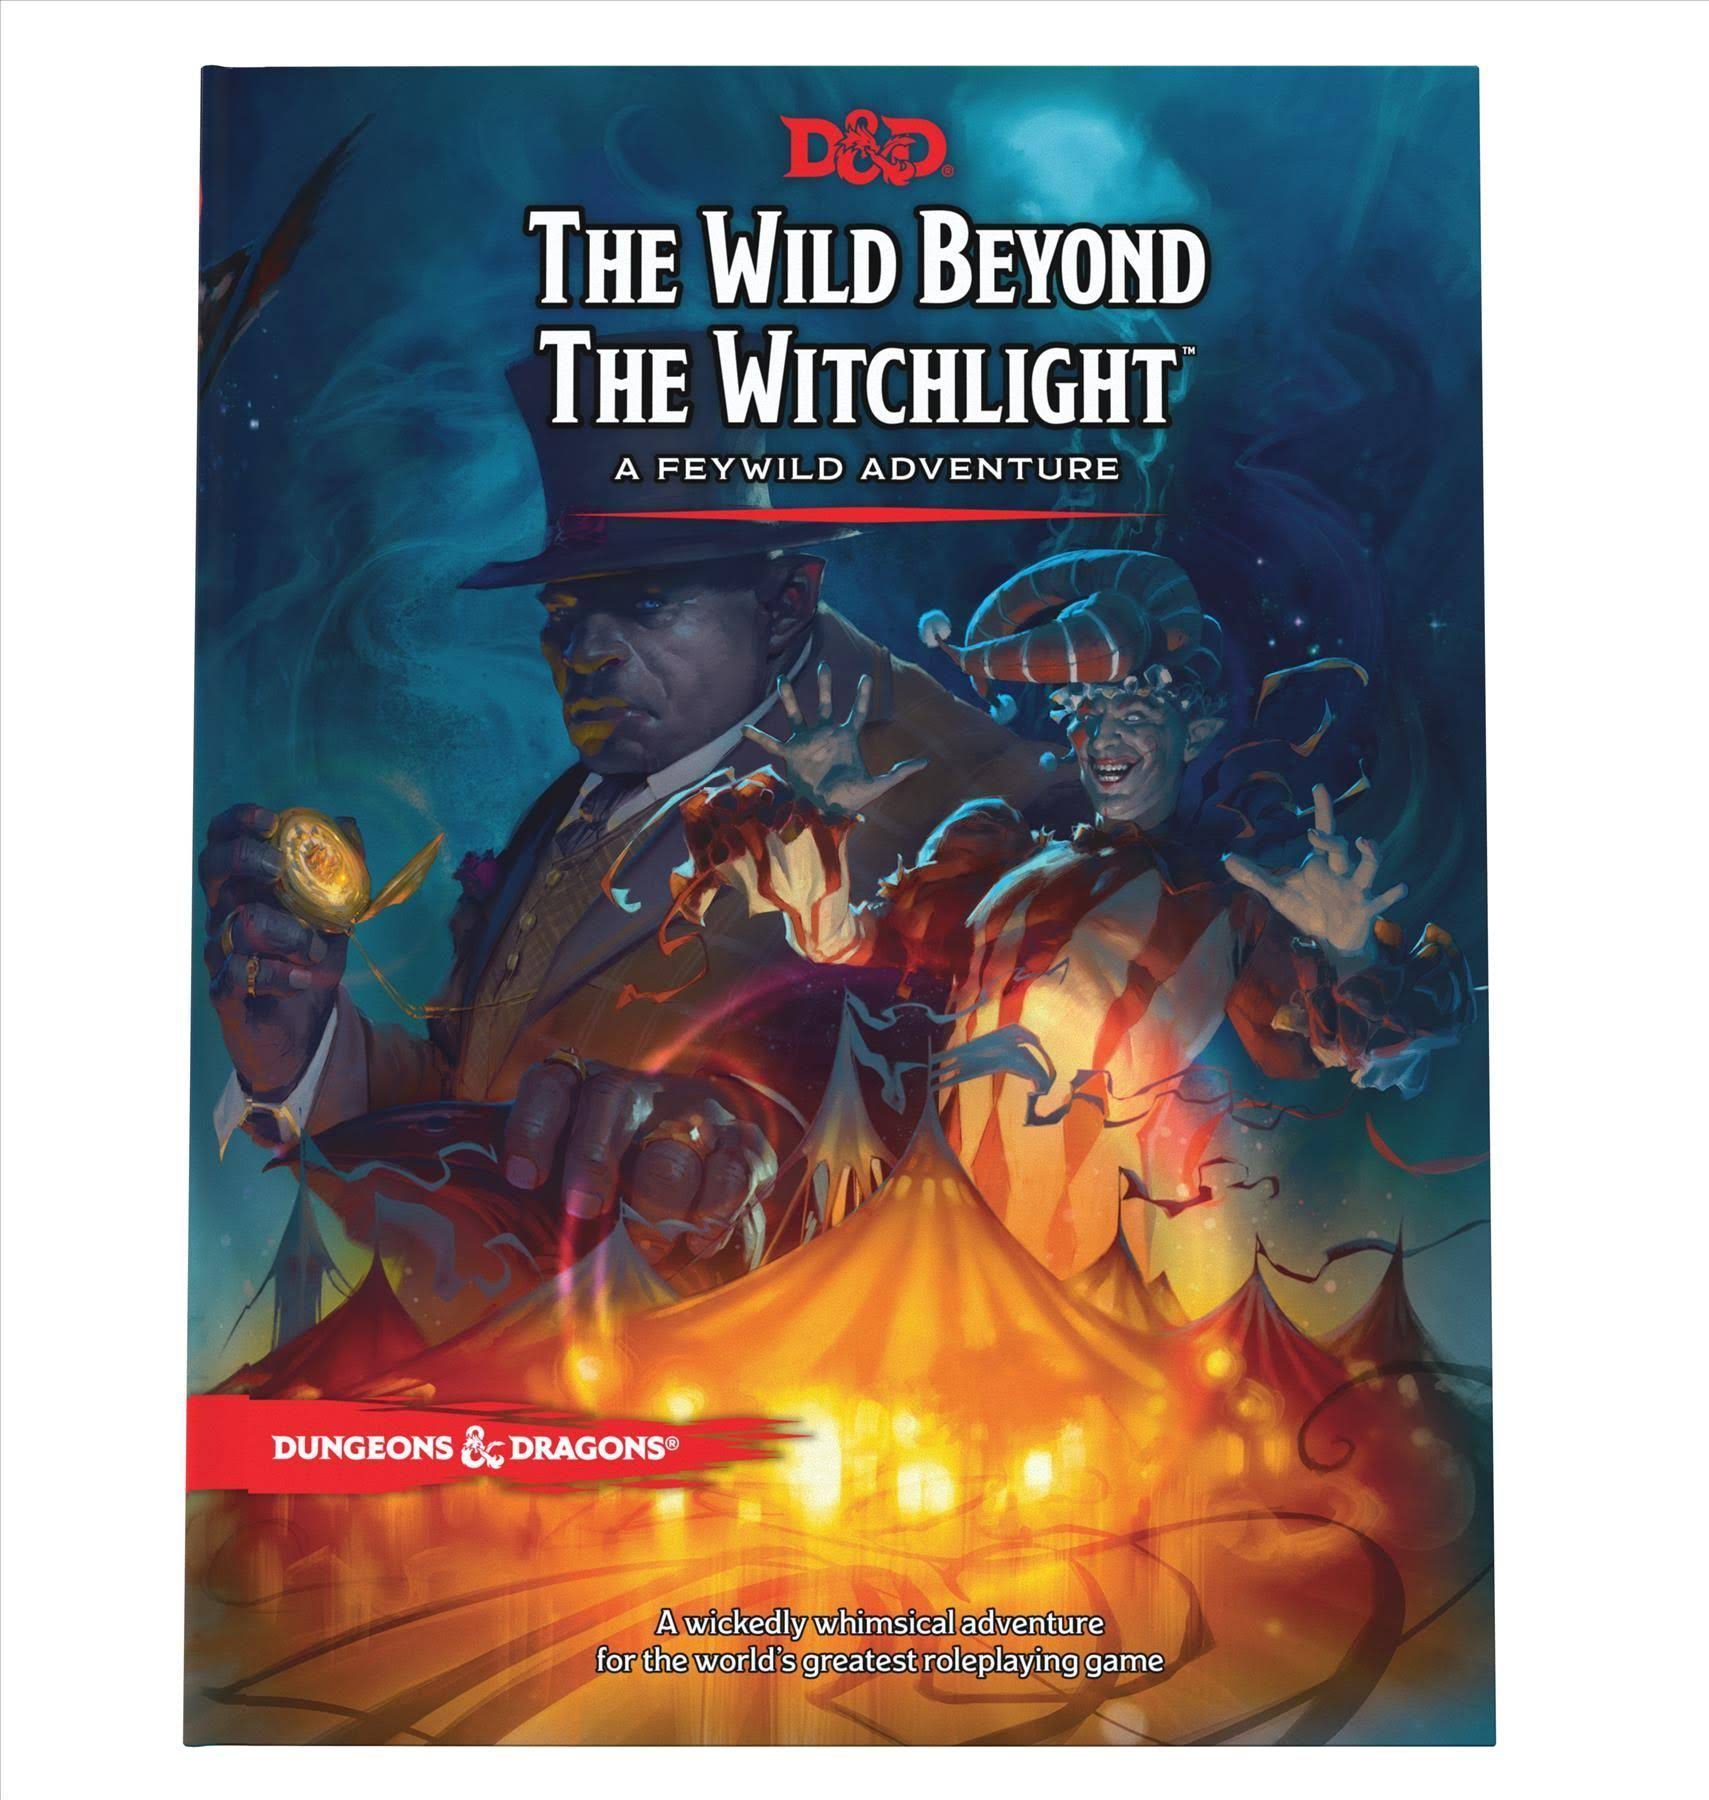 The Wild Beyond the Witchlight: A Feywild Adventure (Dungeons & Dragons Book) [Book]